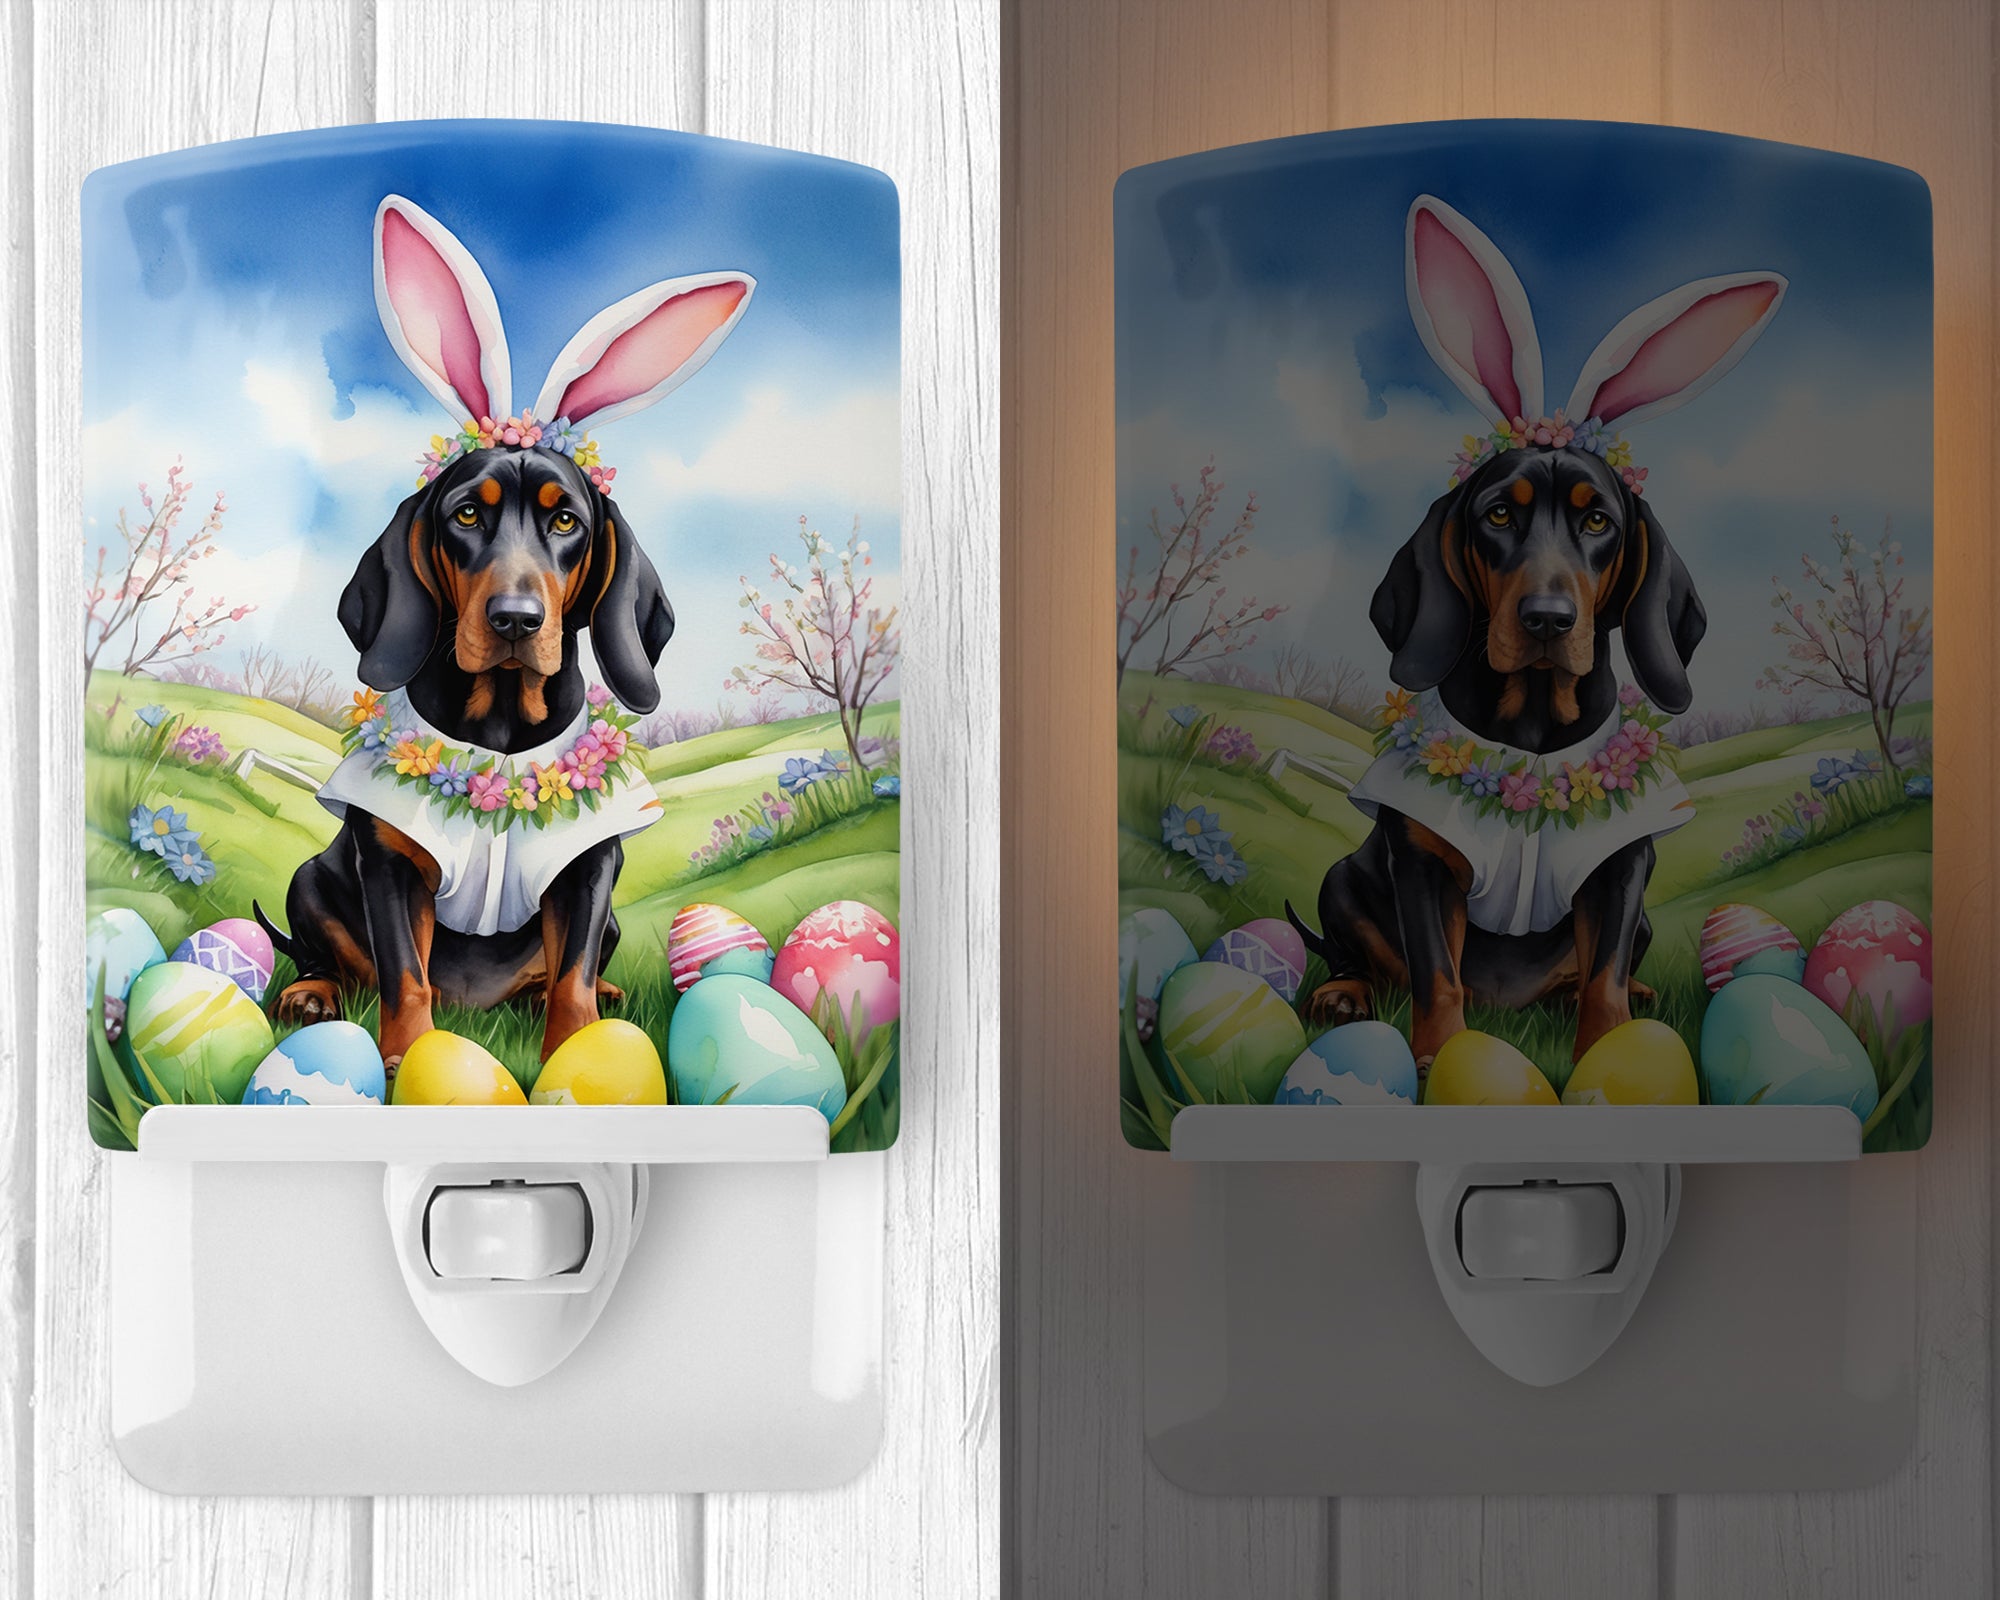 Buy this Black and Tan Coonhound Easter Egg Hunt Ceramic Night Light